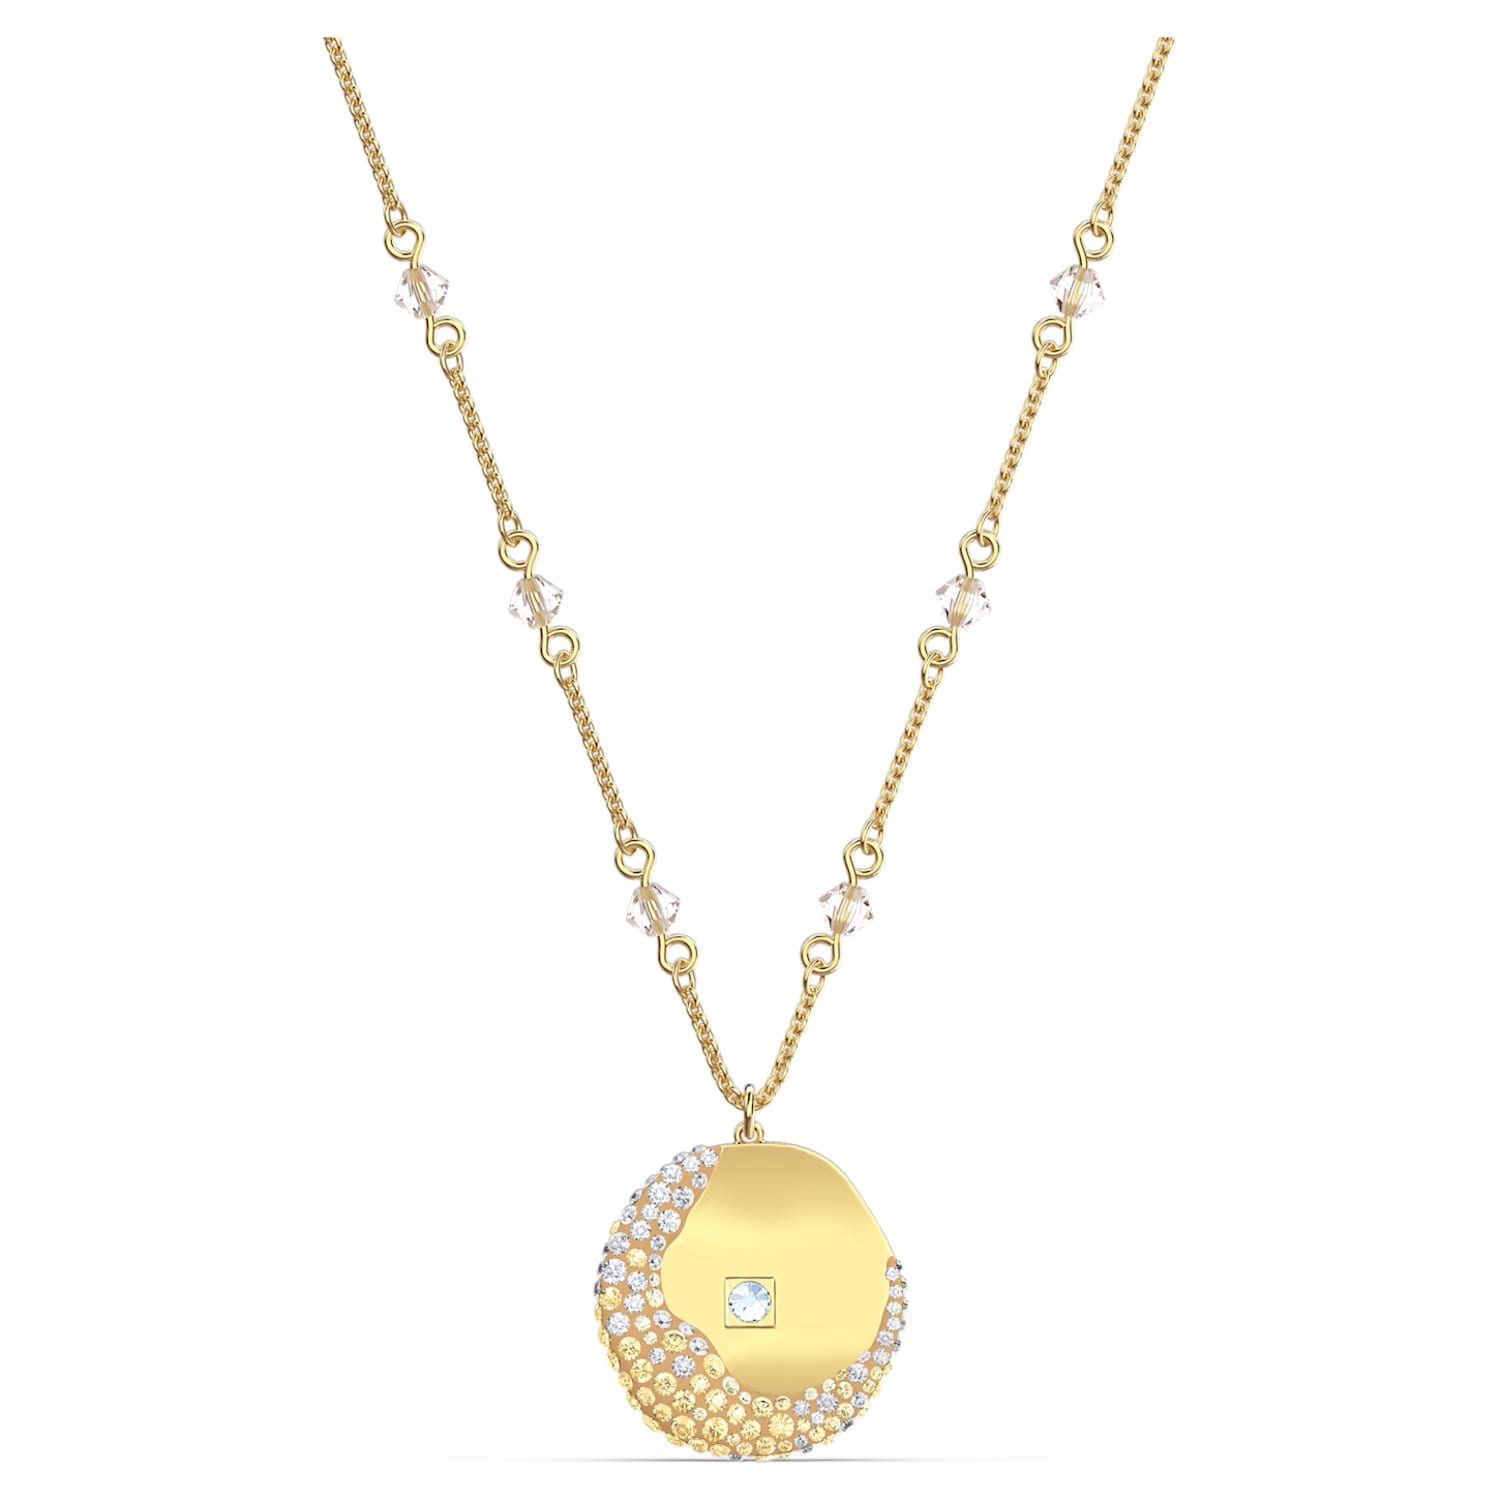 The Elements pendant, Air element, Yellow, Gold-tone plated